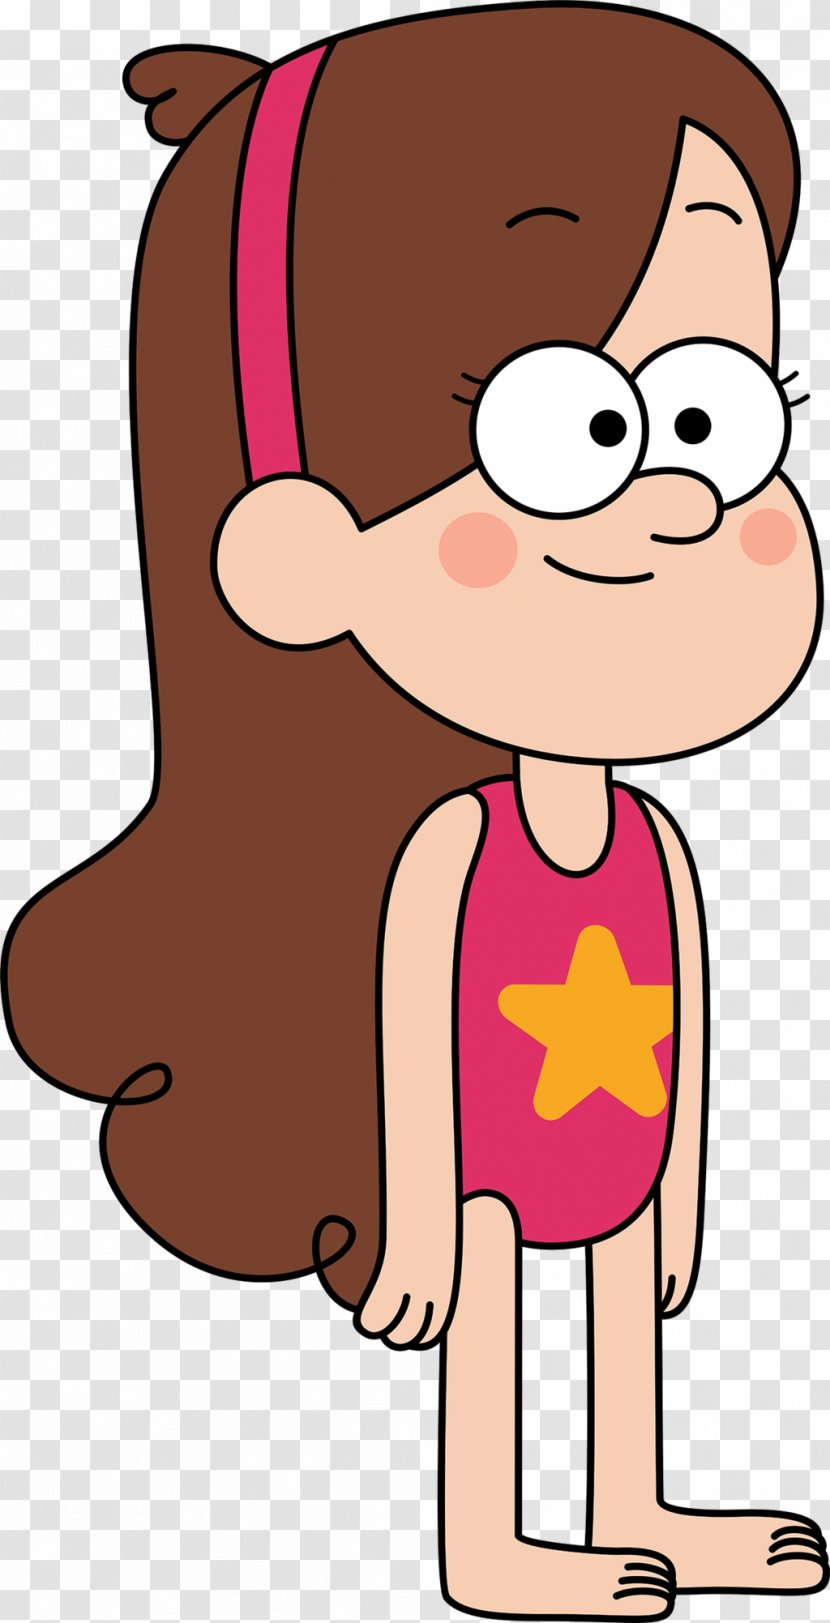 Mabel Pines Dipper Pines Grunkle Stan Grappling hook Gravity Falls: Legend  of the Gnome Gemulets, bill Cipher, cartoon png